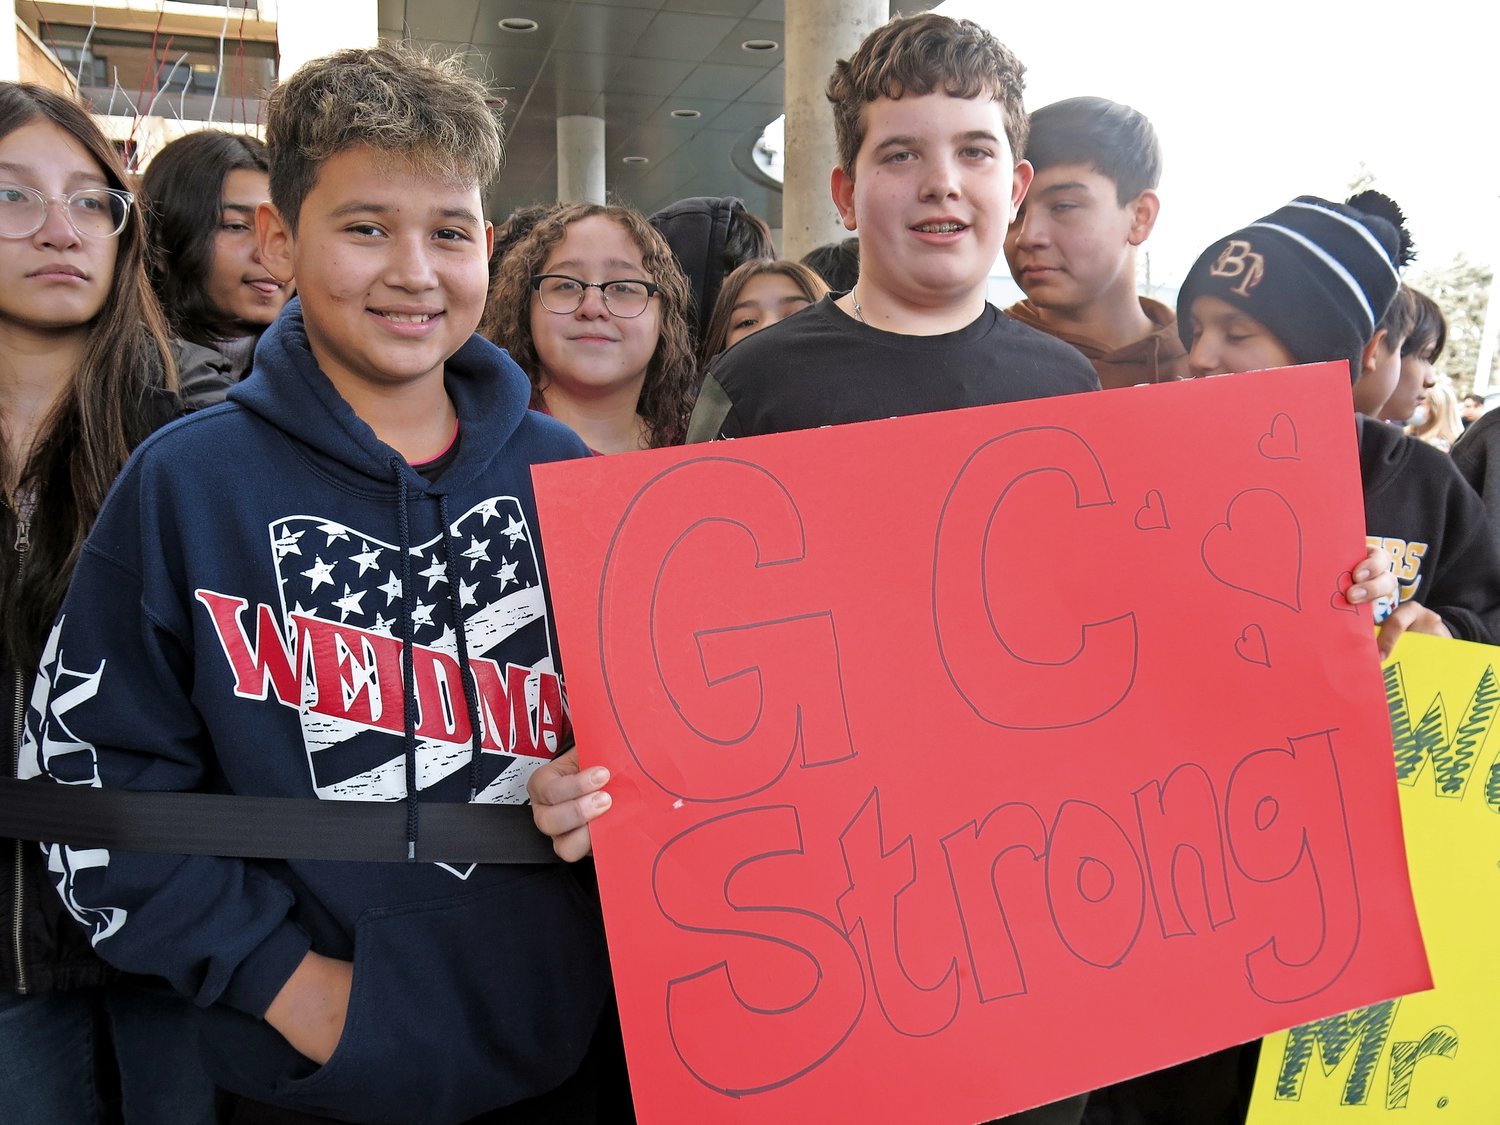 Jefferson Thomas, 13, and Thanasi Averopoulos, 12, from Finley Middle School, made a sign of encouragement for Carlos Vazquez, their favorite crossing guard.